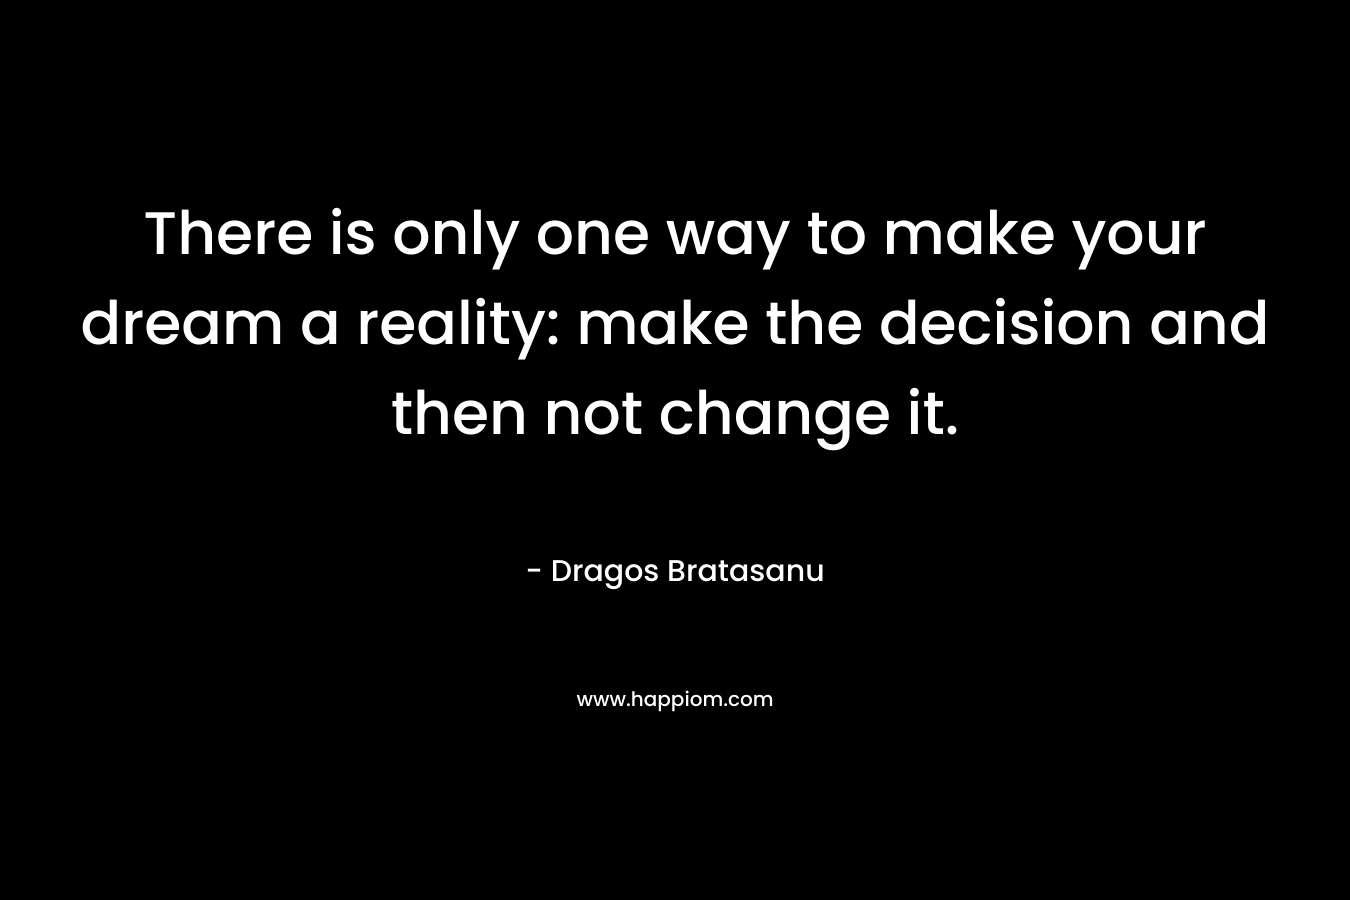 There is only one way to make your dream a reality: make the decision and then not change it. – Dragos Bratasanu